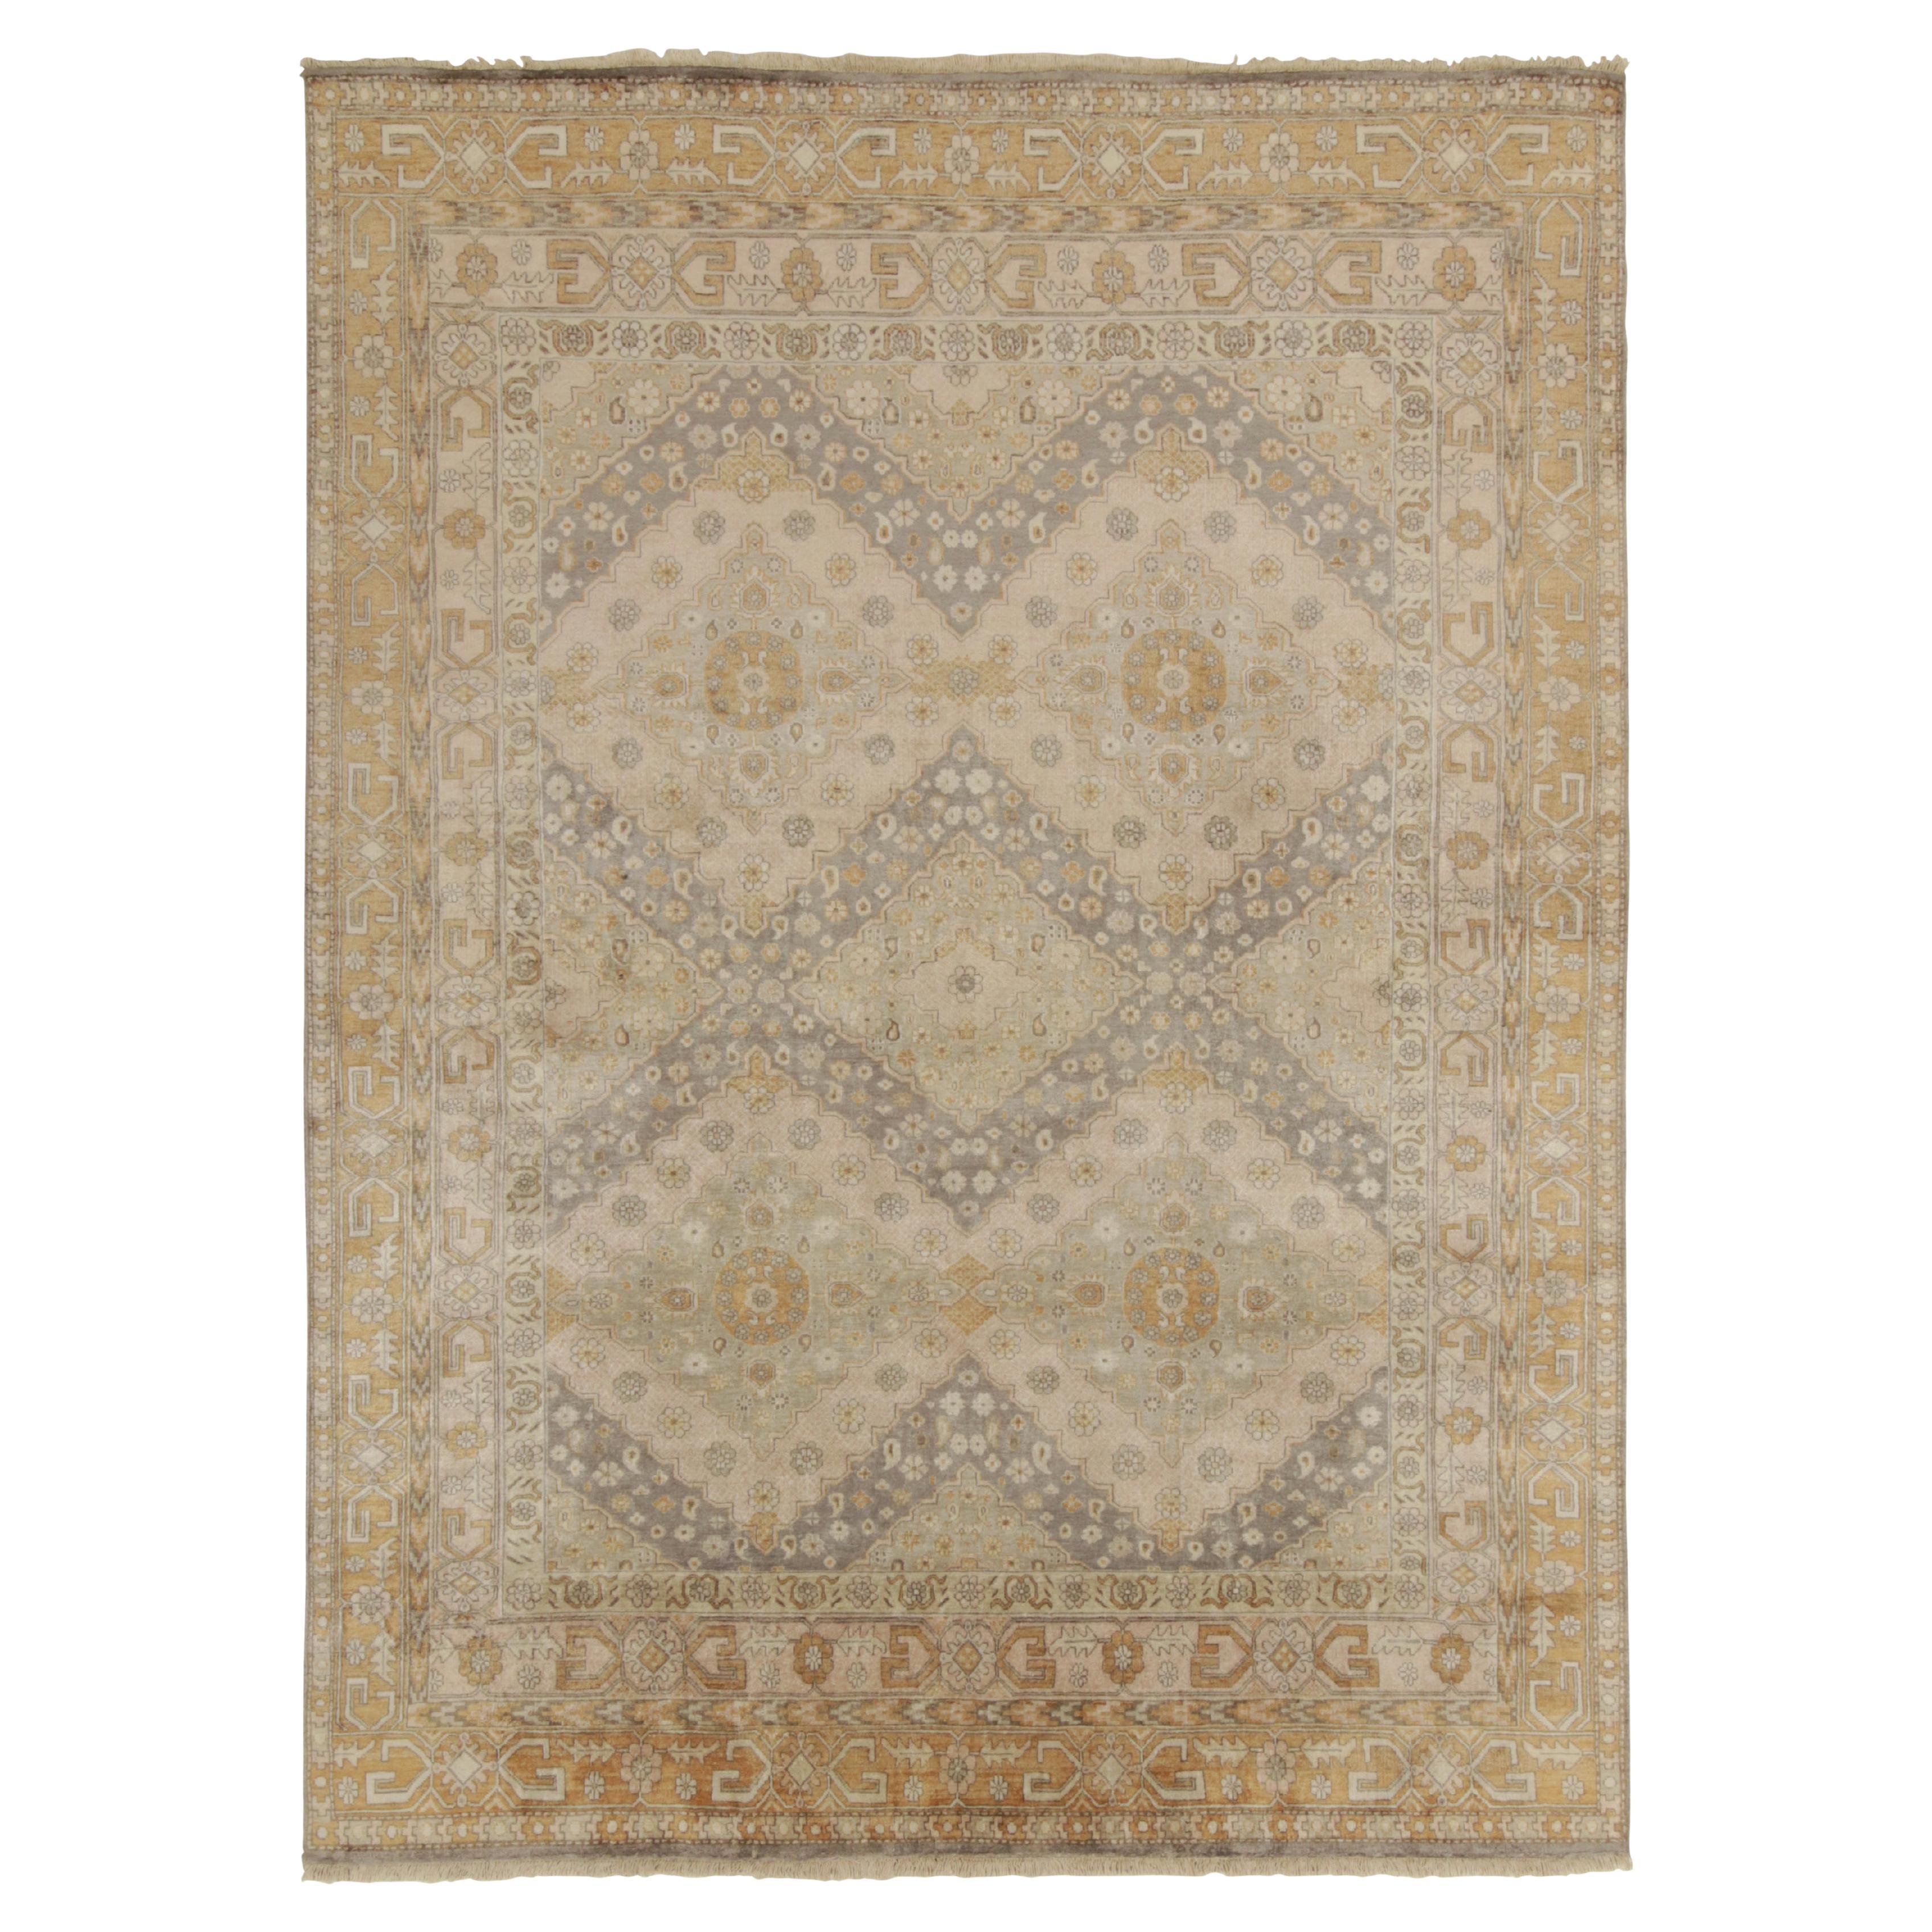 Rug & Kilim’s Classic Khotan style rug in Beige & Gold Diamonds, Floral Patterns For Sale